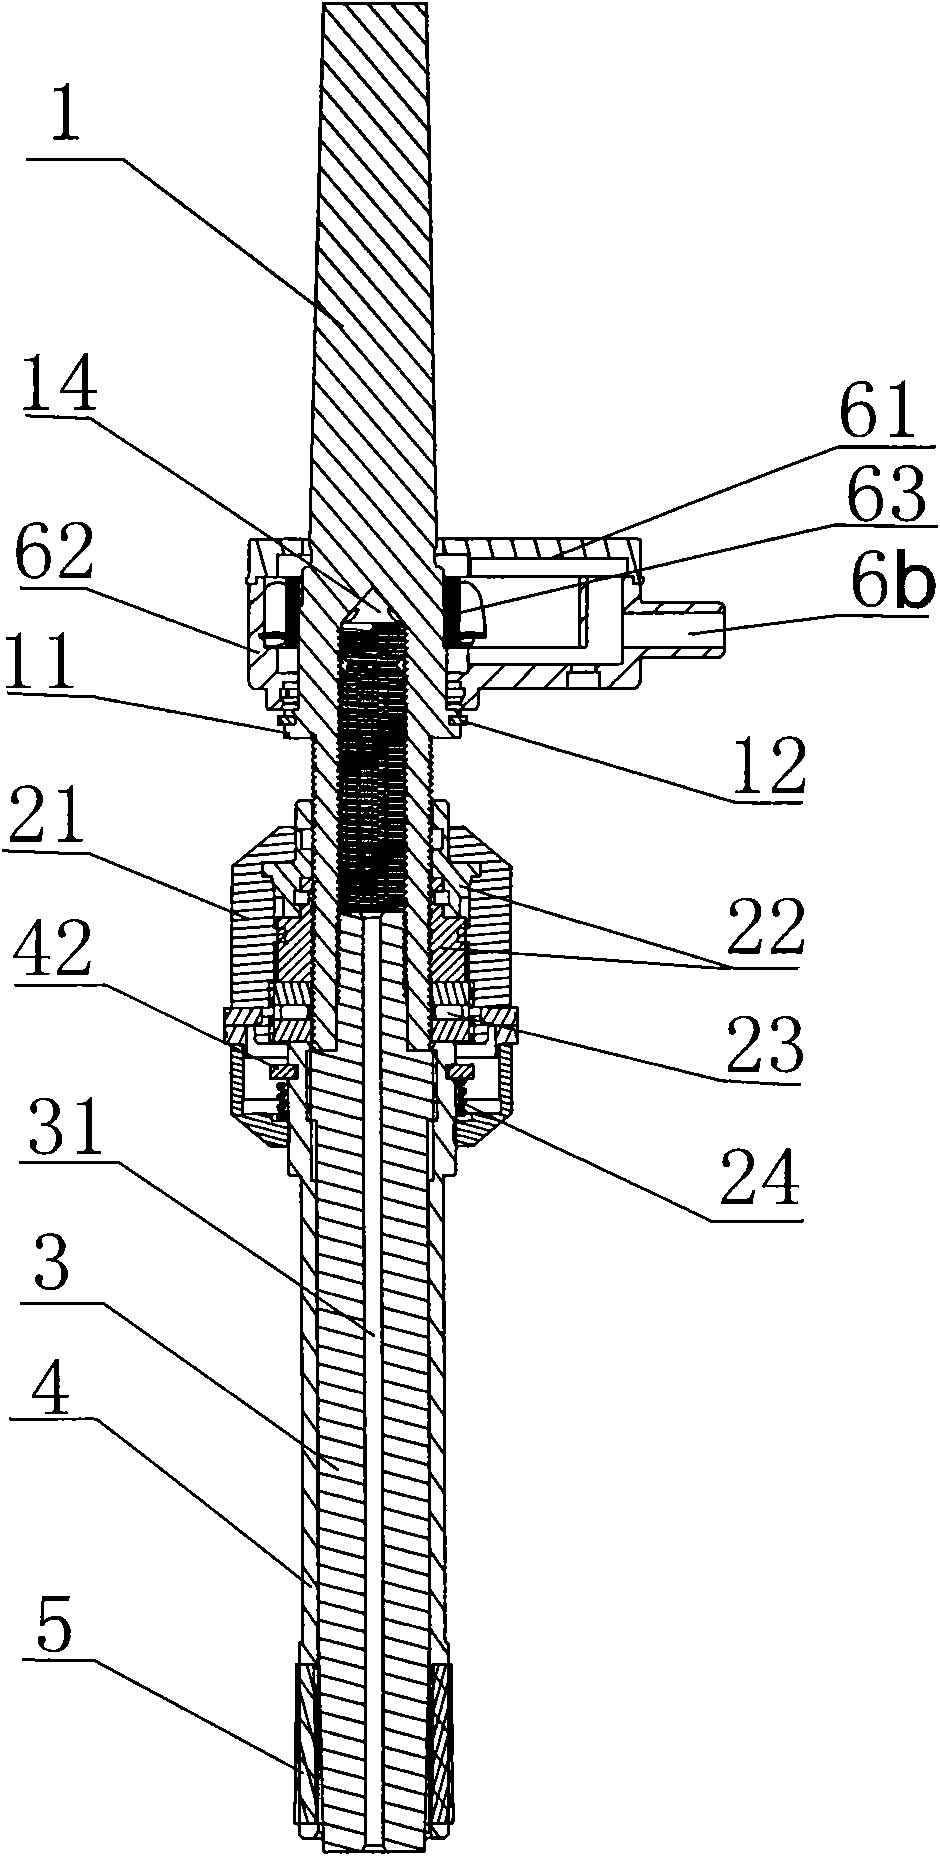 Self-suction internally-cooled cutter